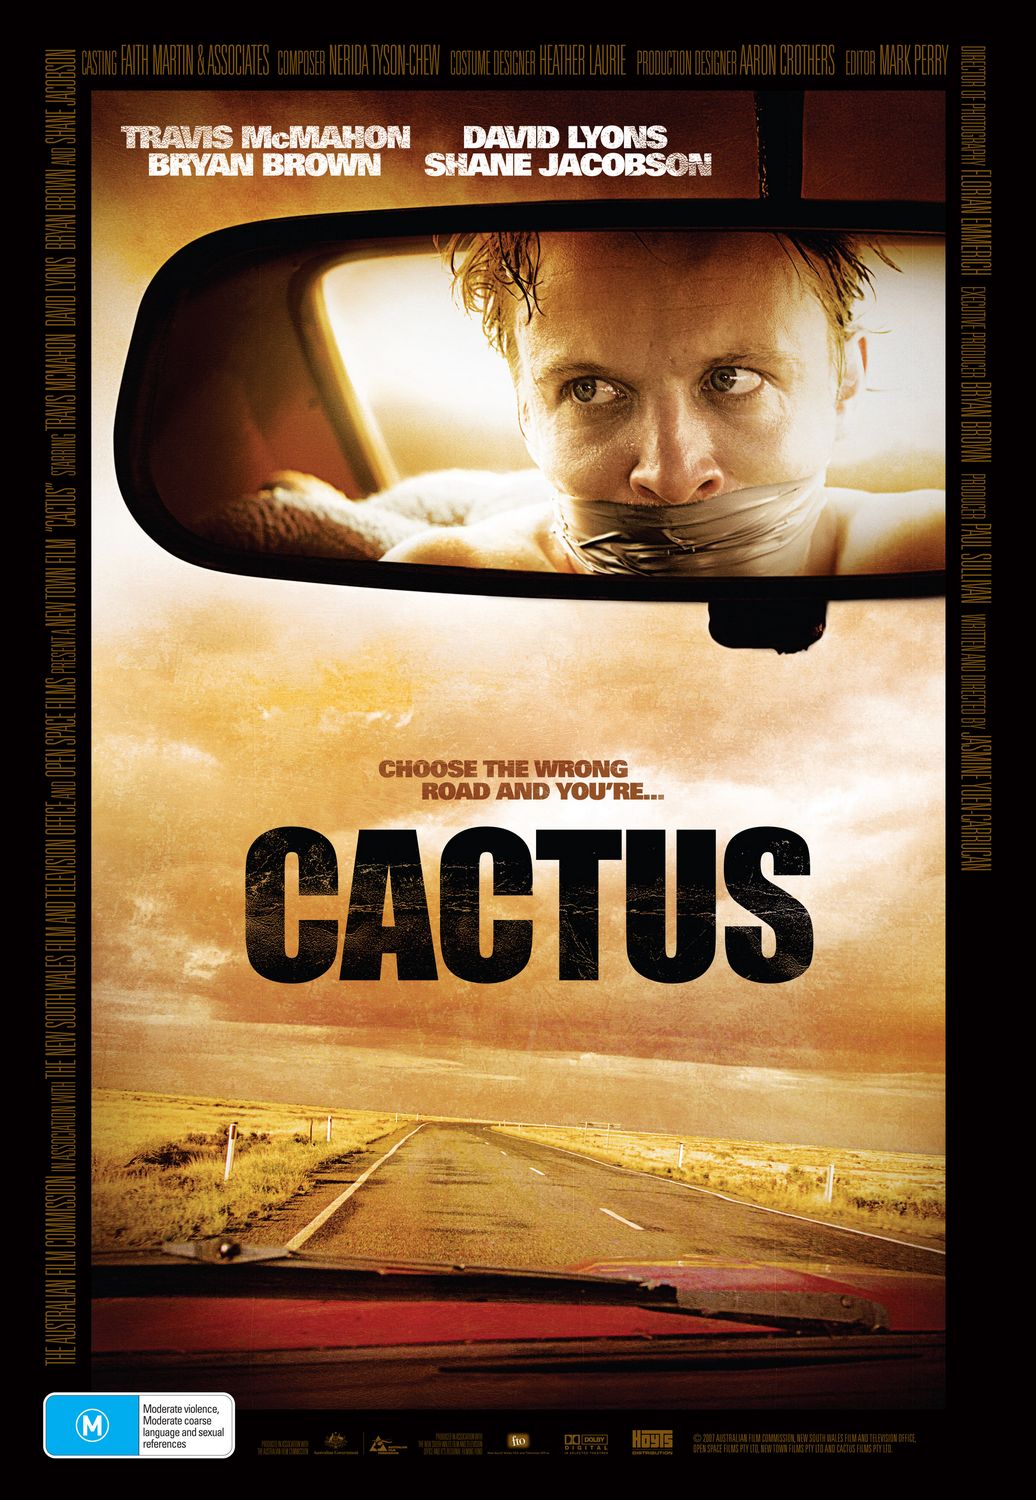 Extra Large Movie Poster Image for Cactus 